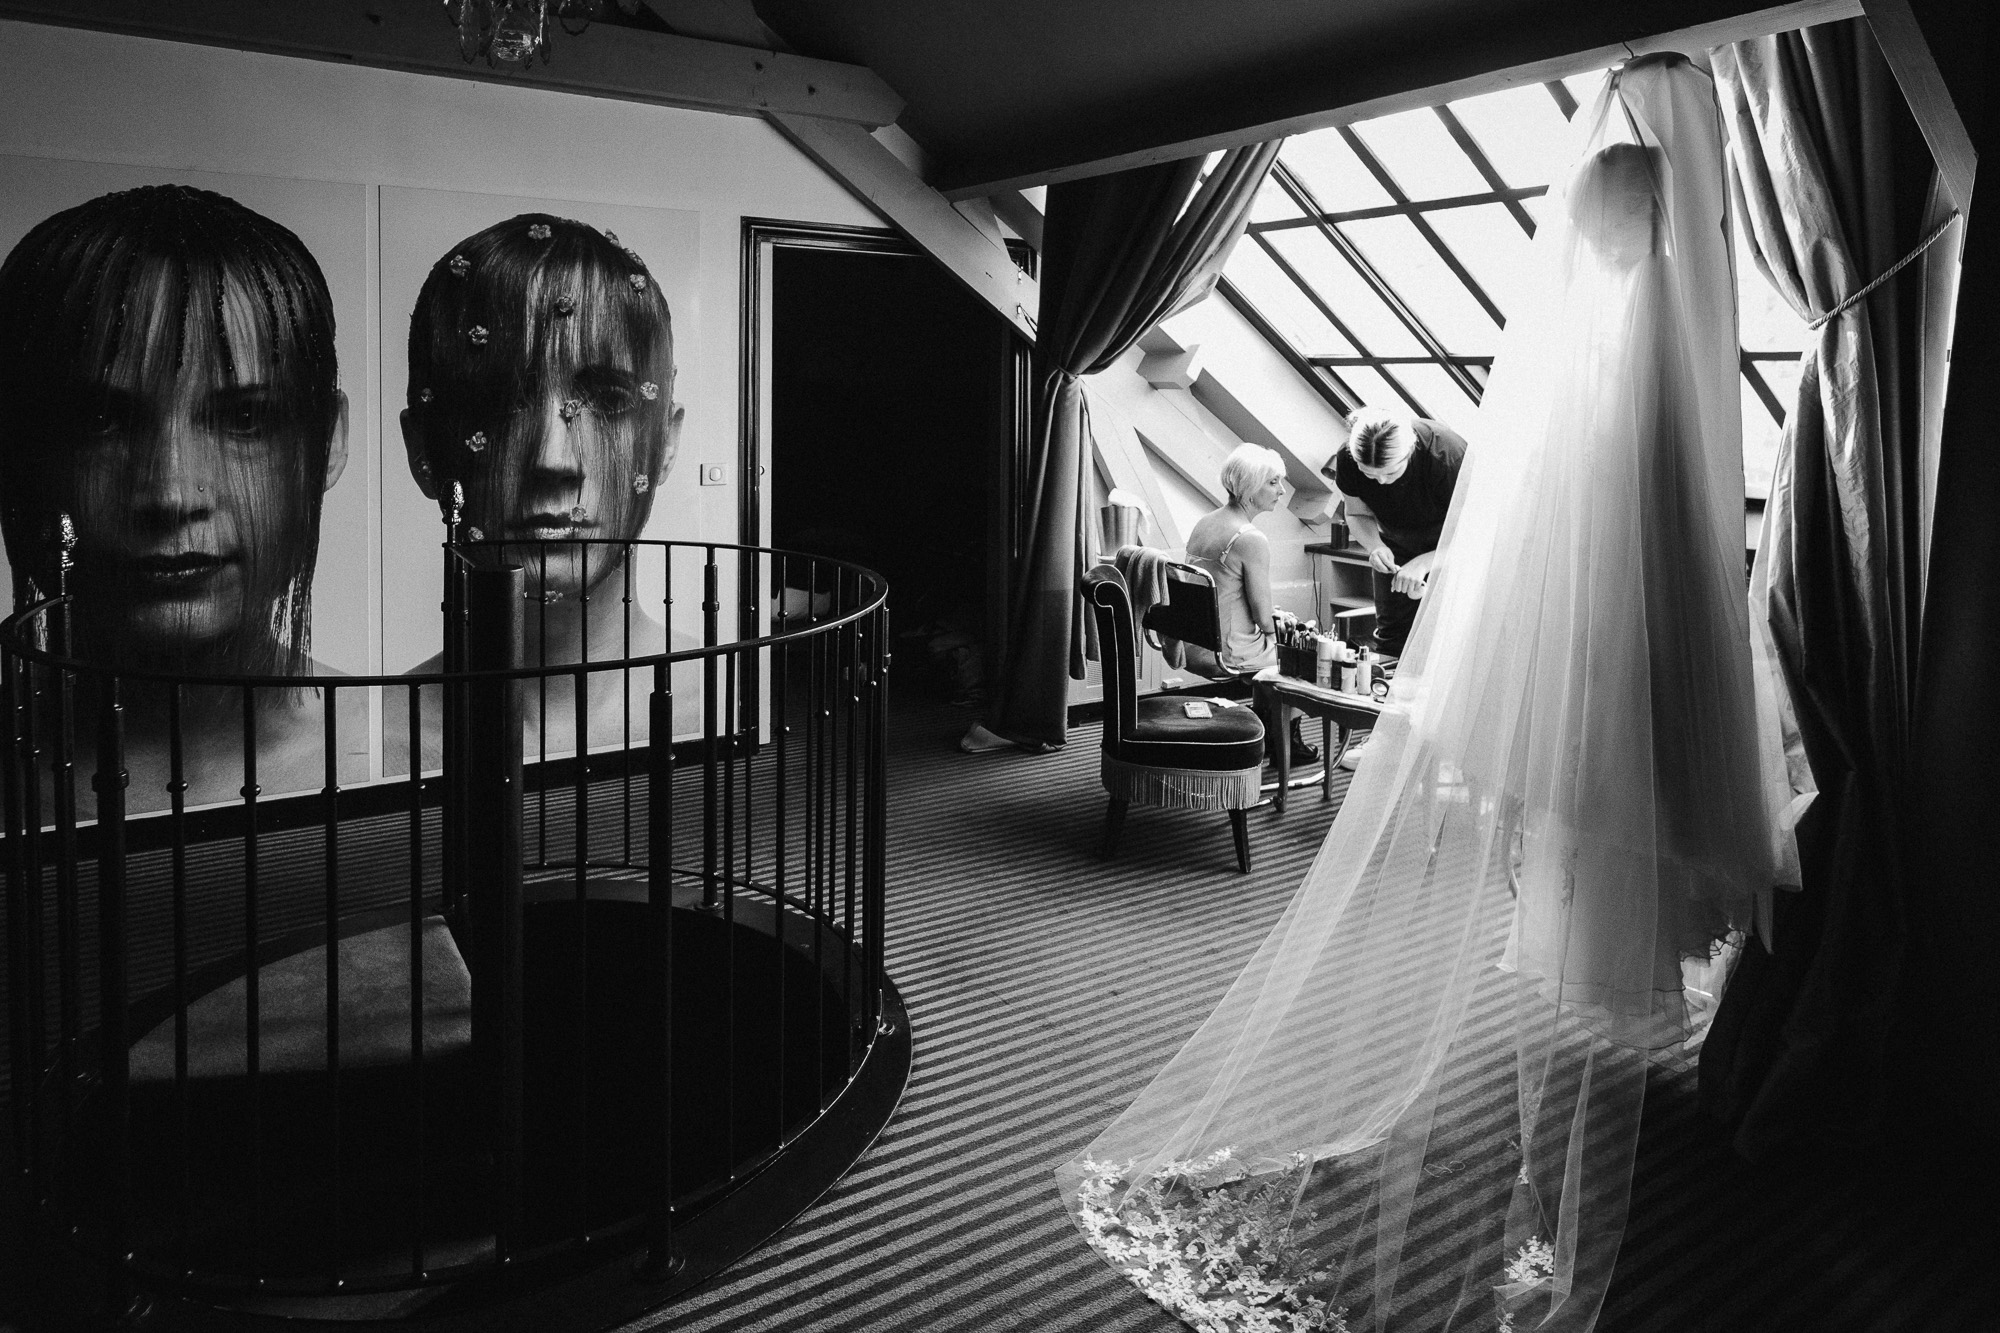 Paris wedding photographer: The Suzanne Neville dress is hanging in the Eiffel suite of Hotel Particulier in Montmartre, Paris